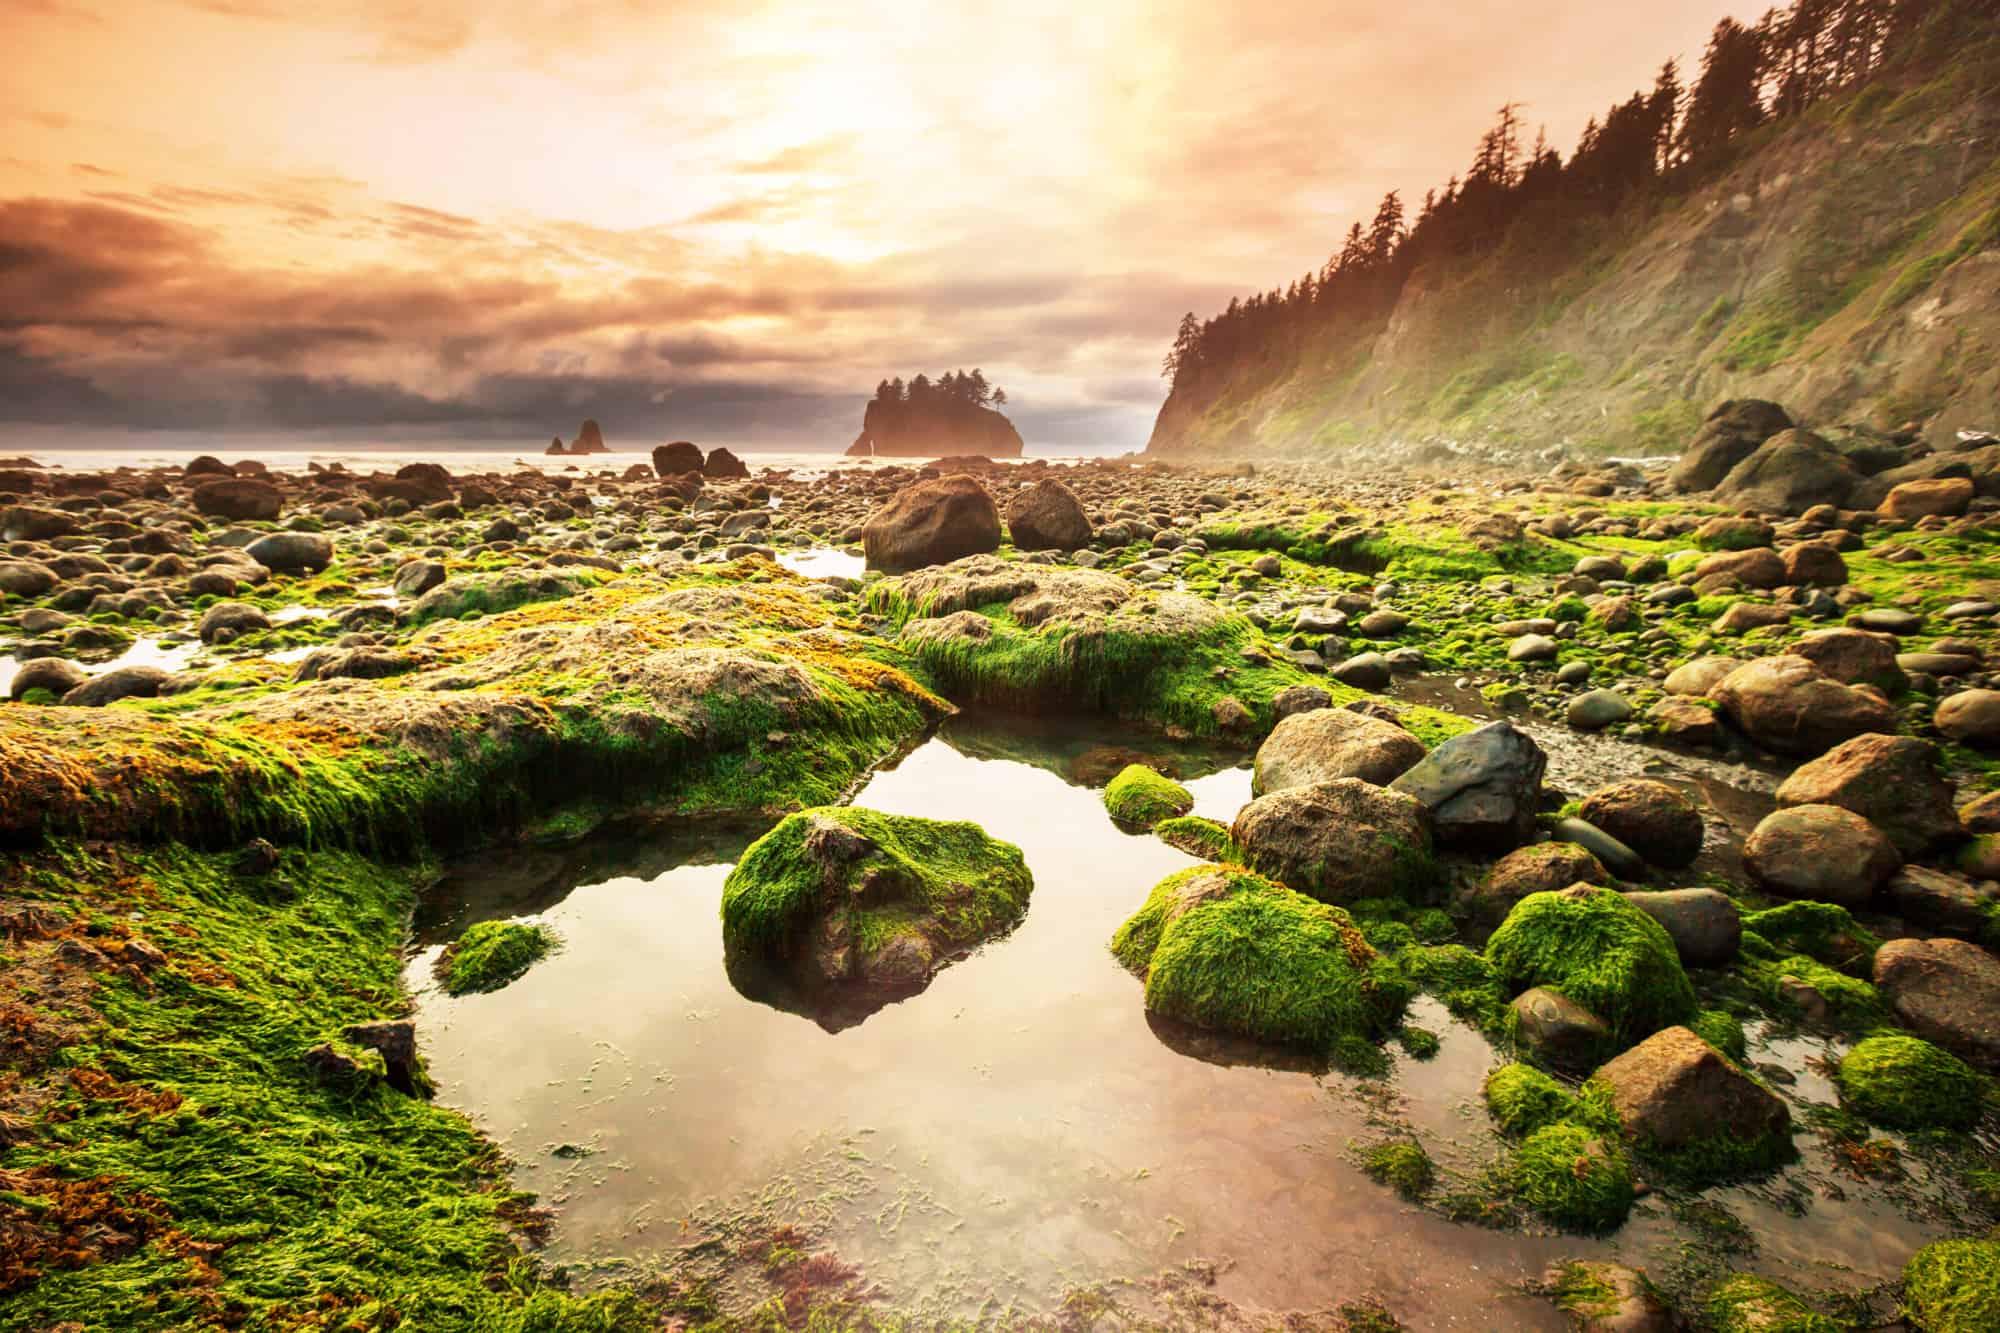 a tide pool can be seen at the front of the image surrounded by mossy rocks with the pacific ocean and seastacks in the background